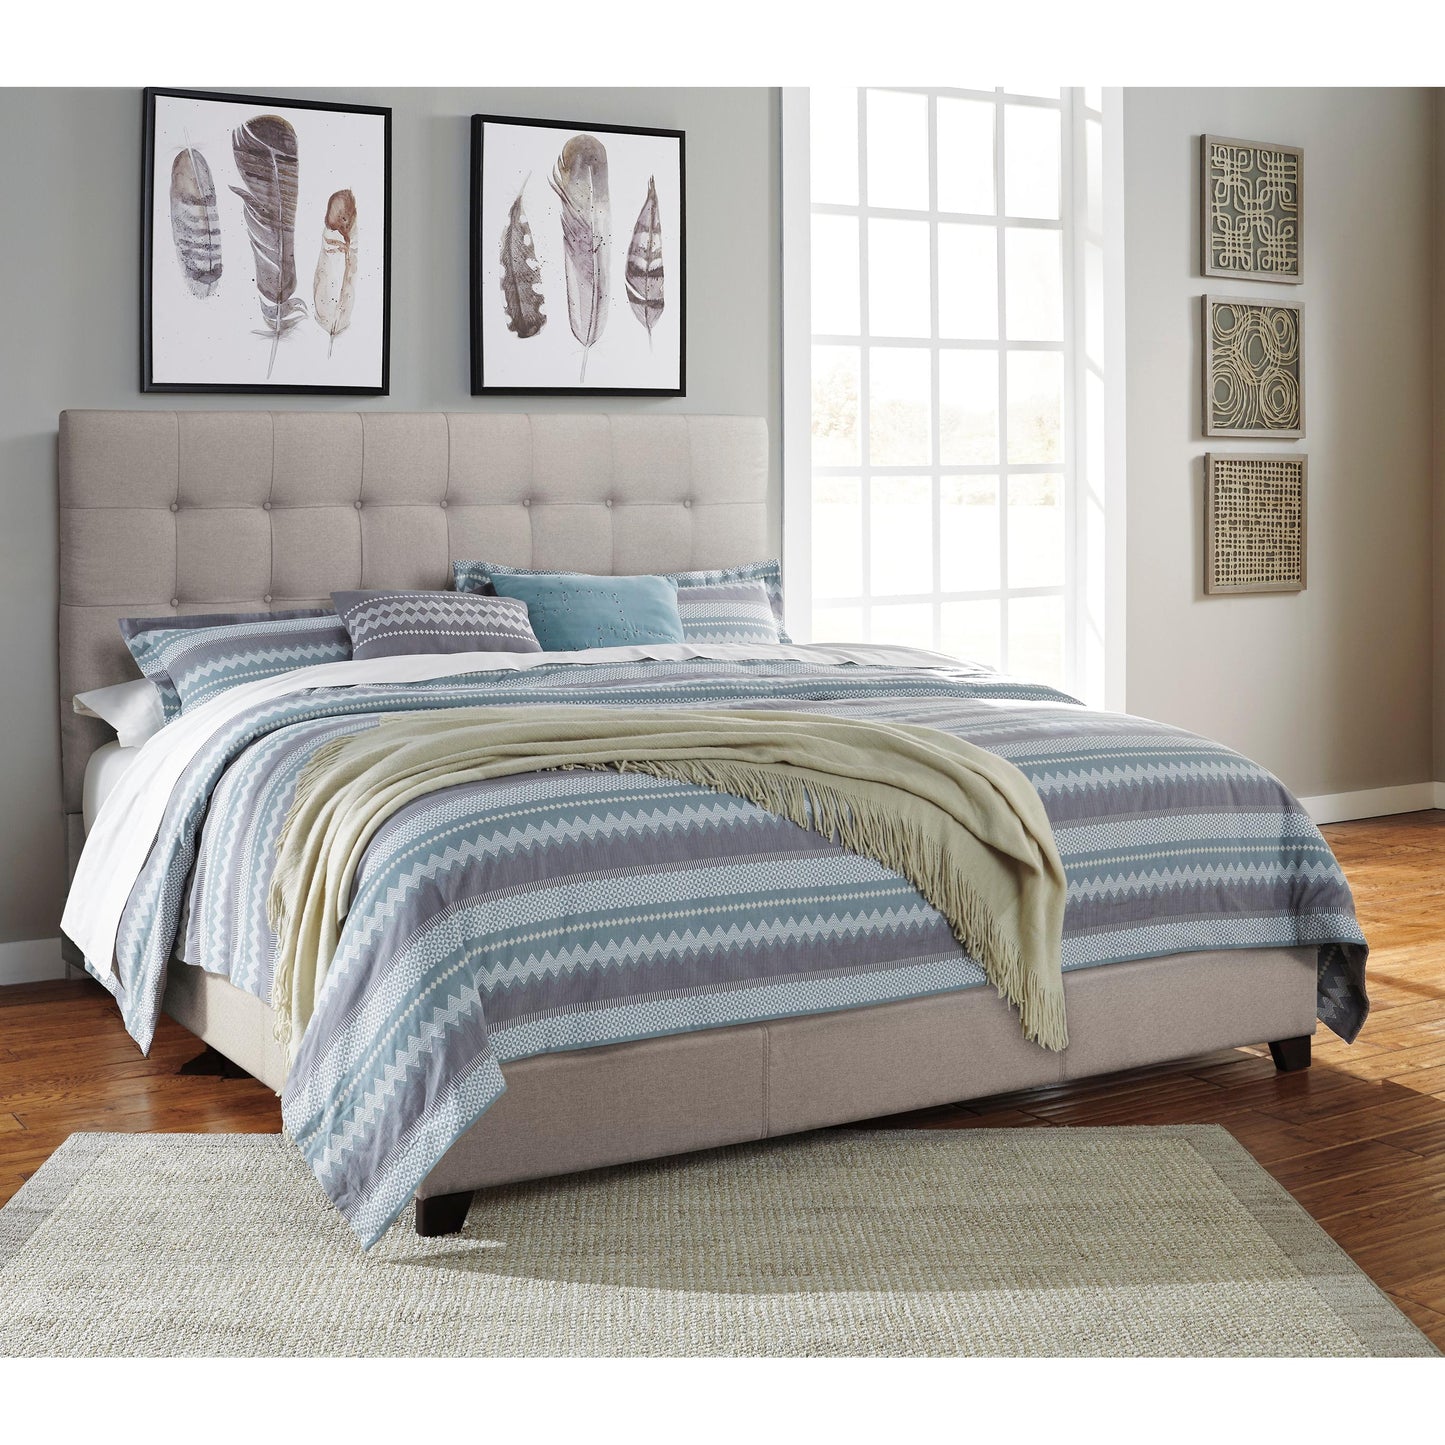 Signature Design by Ashley Dolante Queen Upholstered Bed B130-581